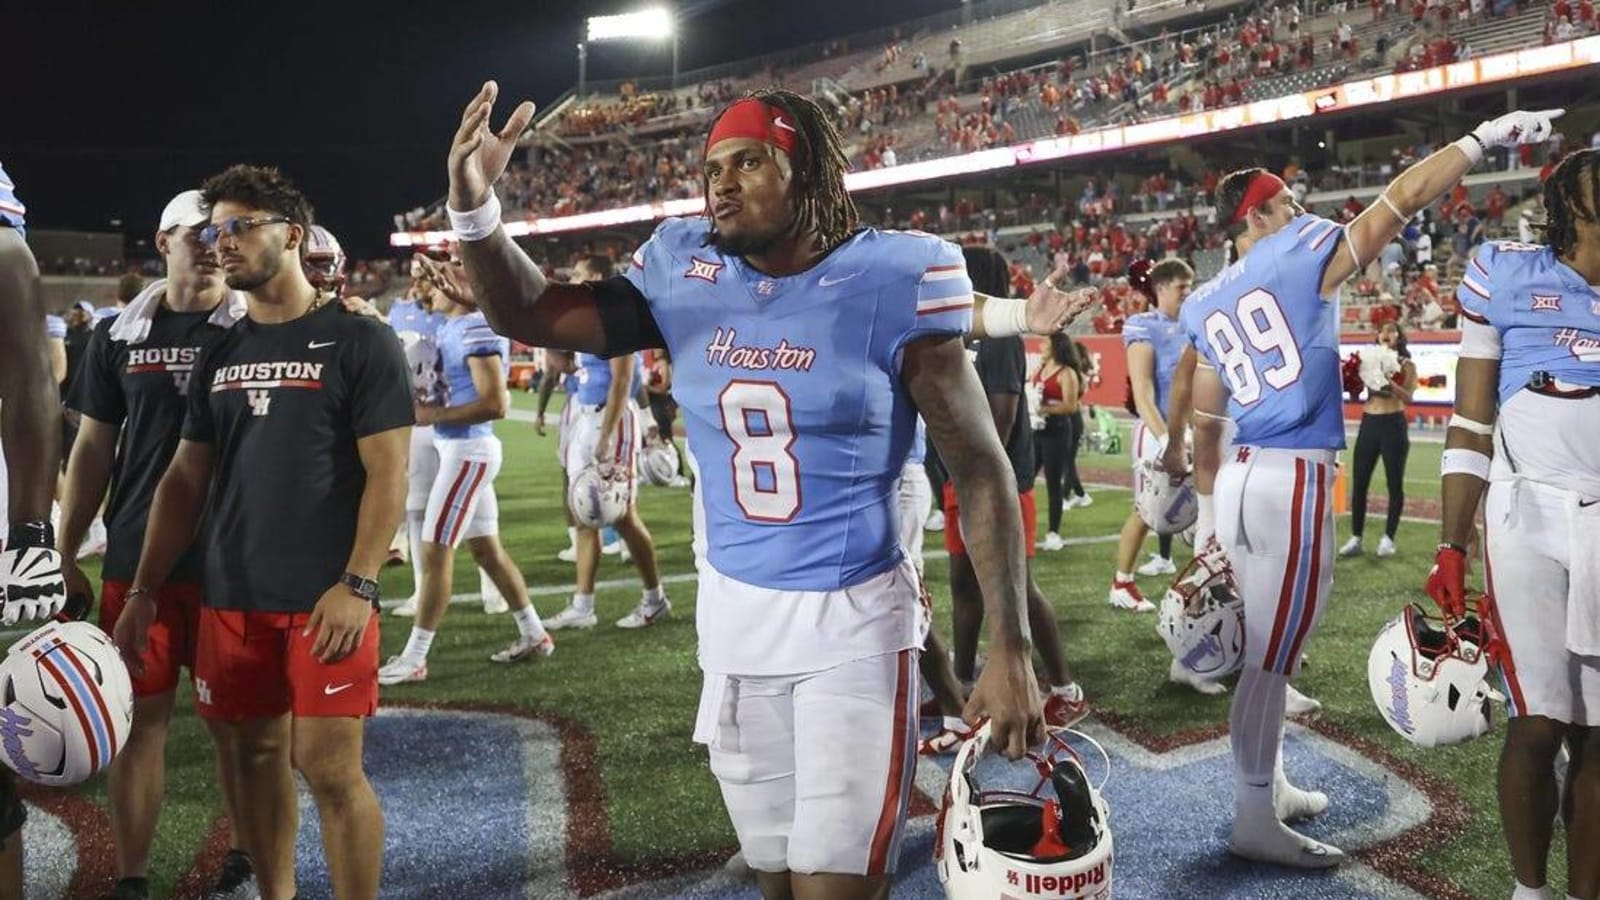 Houston steps up to NFL, plans to wear Columbia blue uniforms